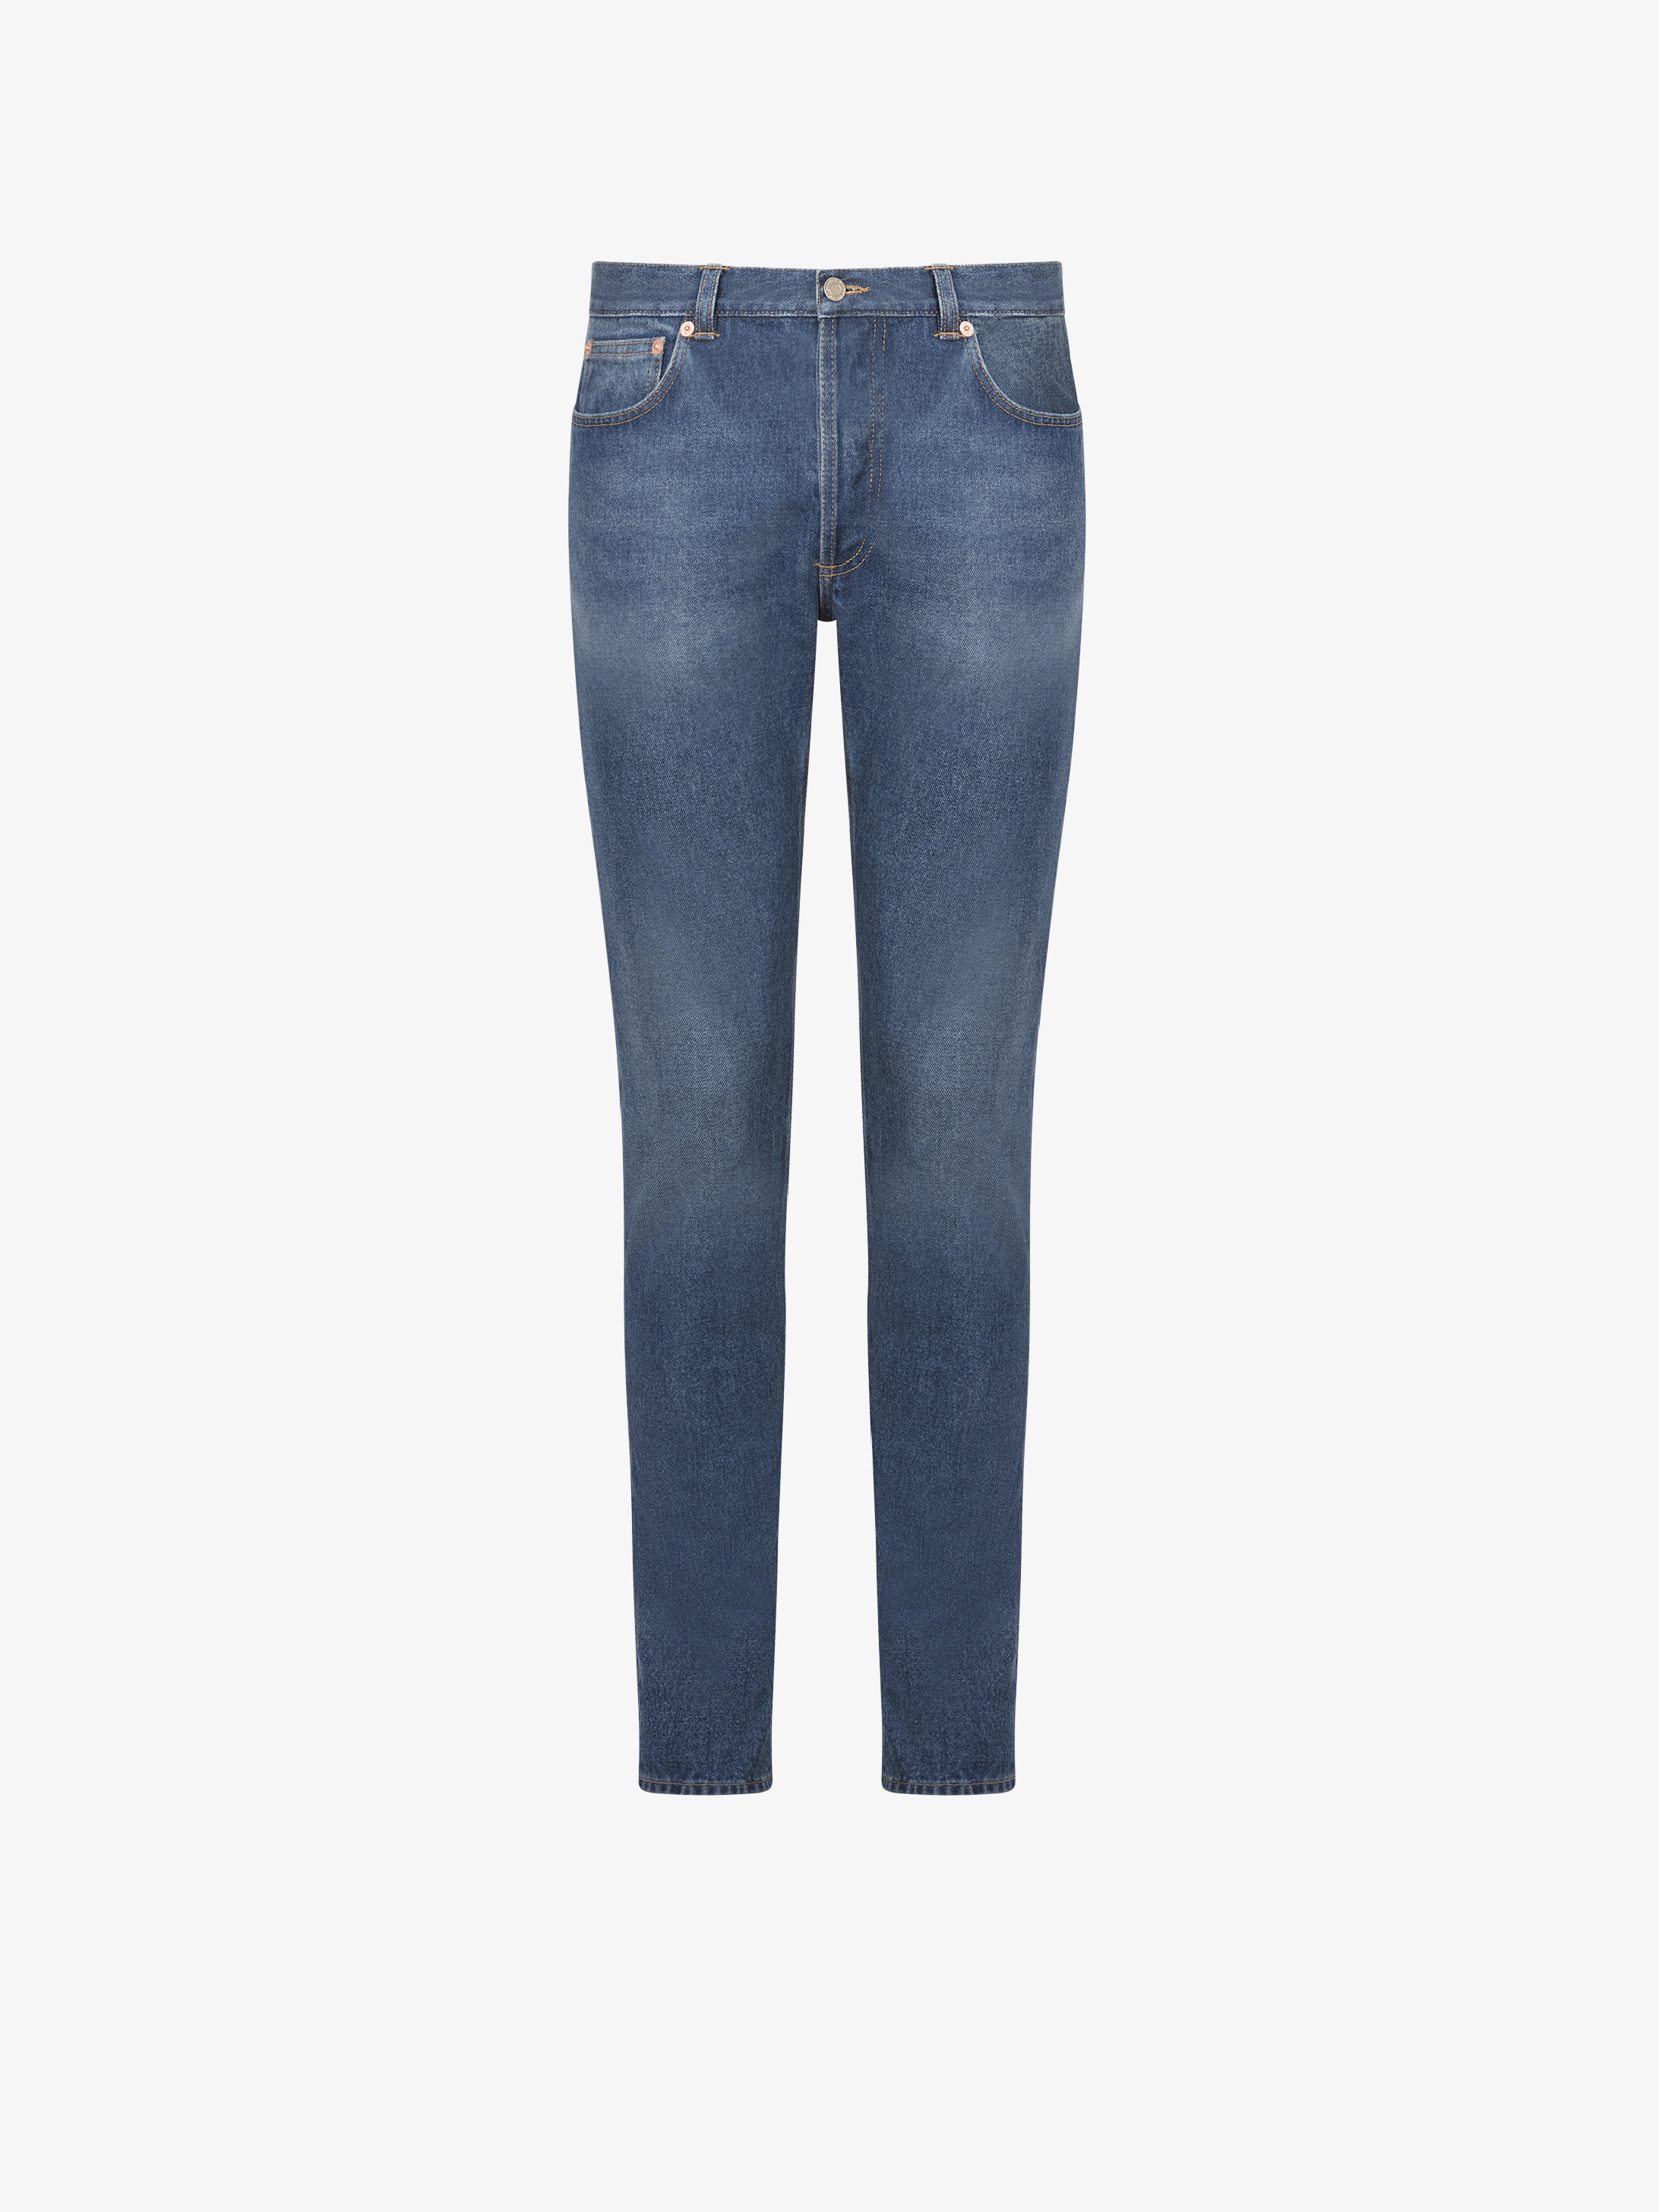 Givenchy PARIS stone washed jeans 